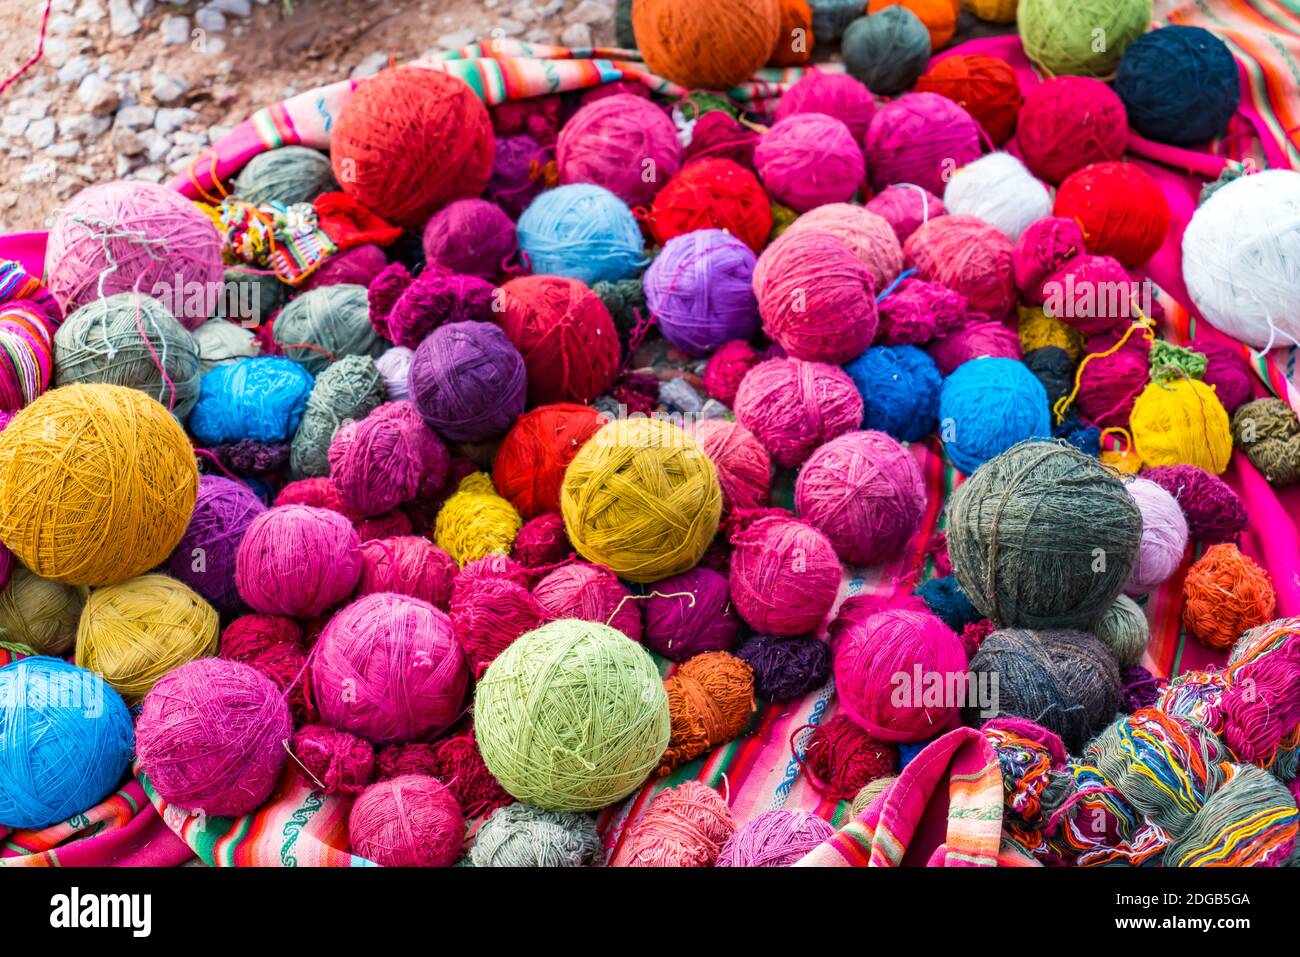 Balls of wool natural dyeing Stock Photo